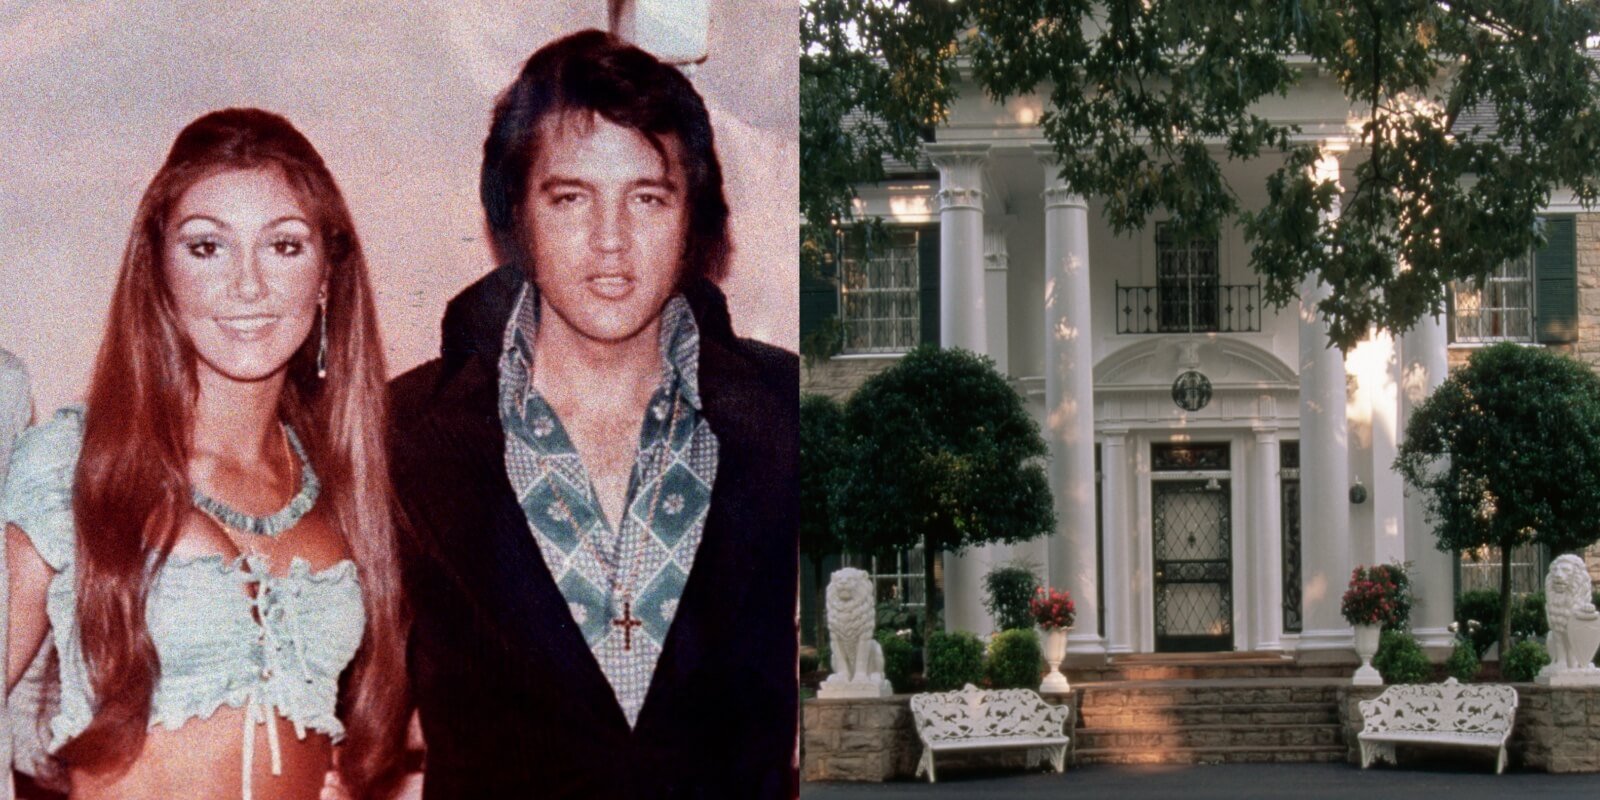 Linda Thompson and Elvis Presley in a side-by-side photograph with the exterior of his Graceland home.